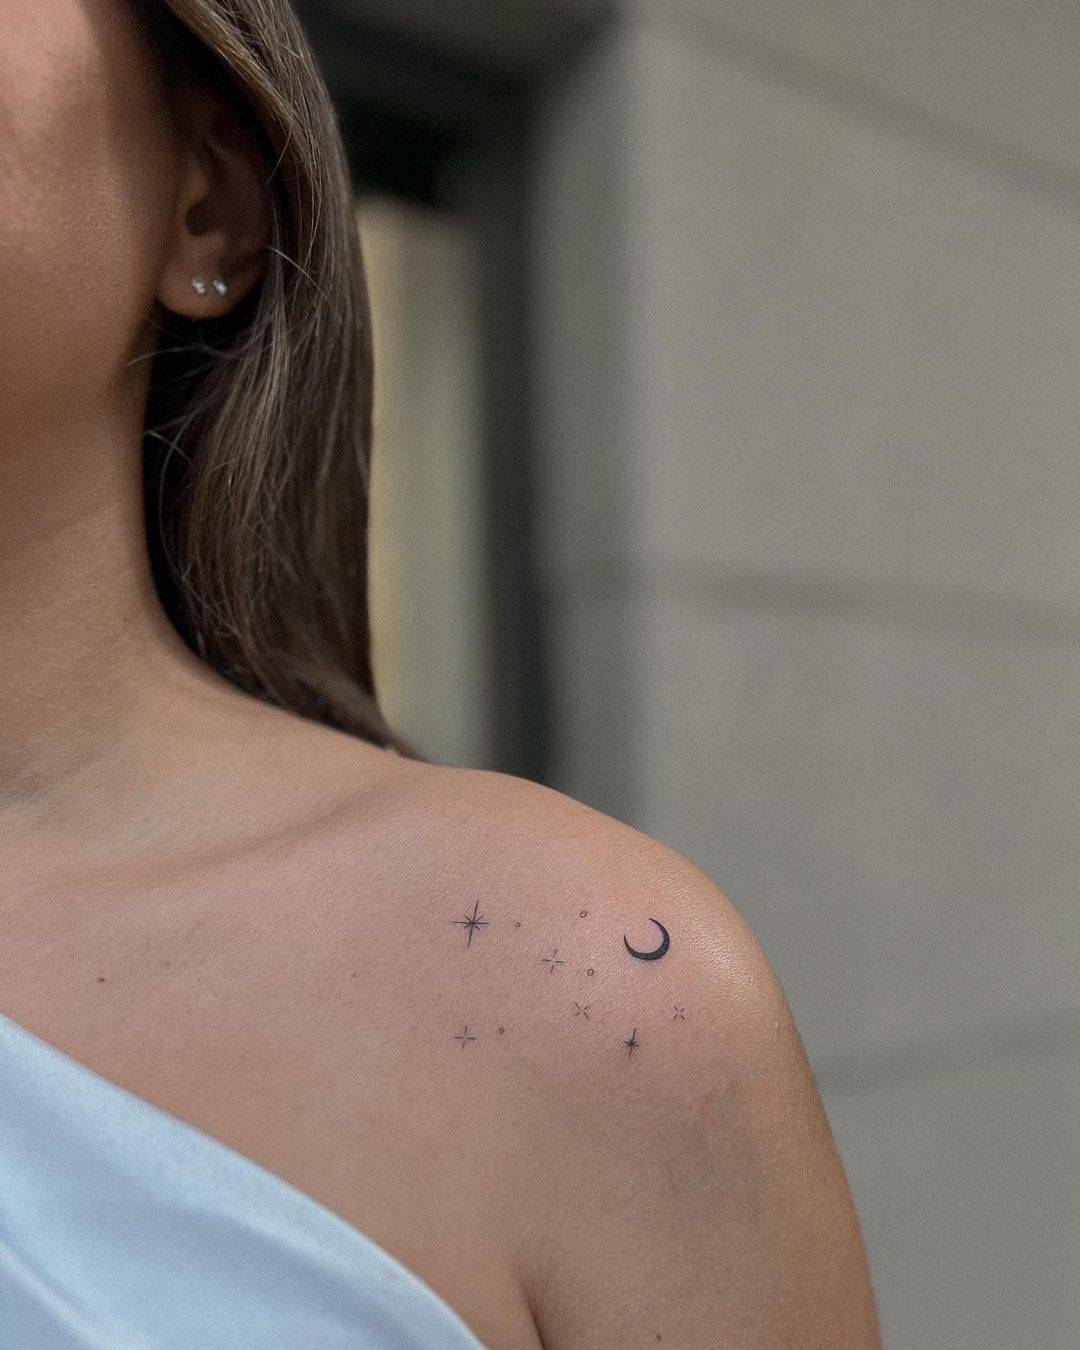 43 Adorable Mini Tattoo Of Moon And Stars For An Alluring Appearance   Psycho Tats